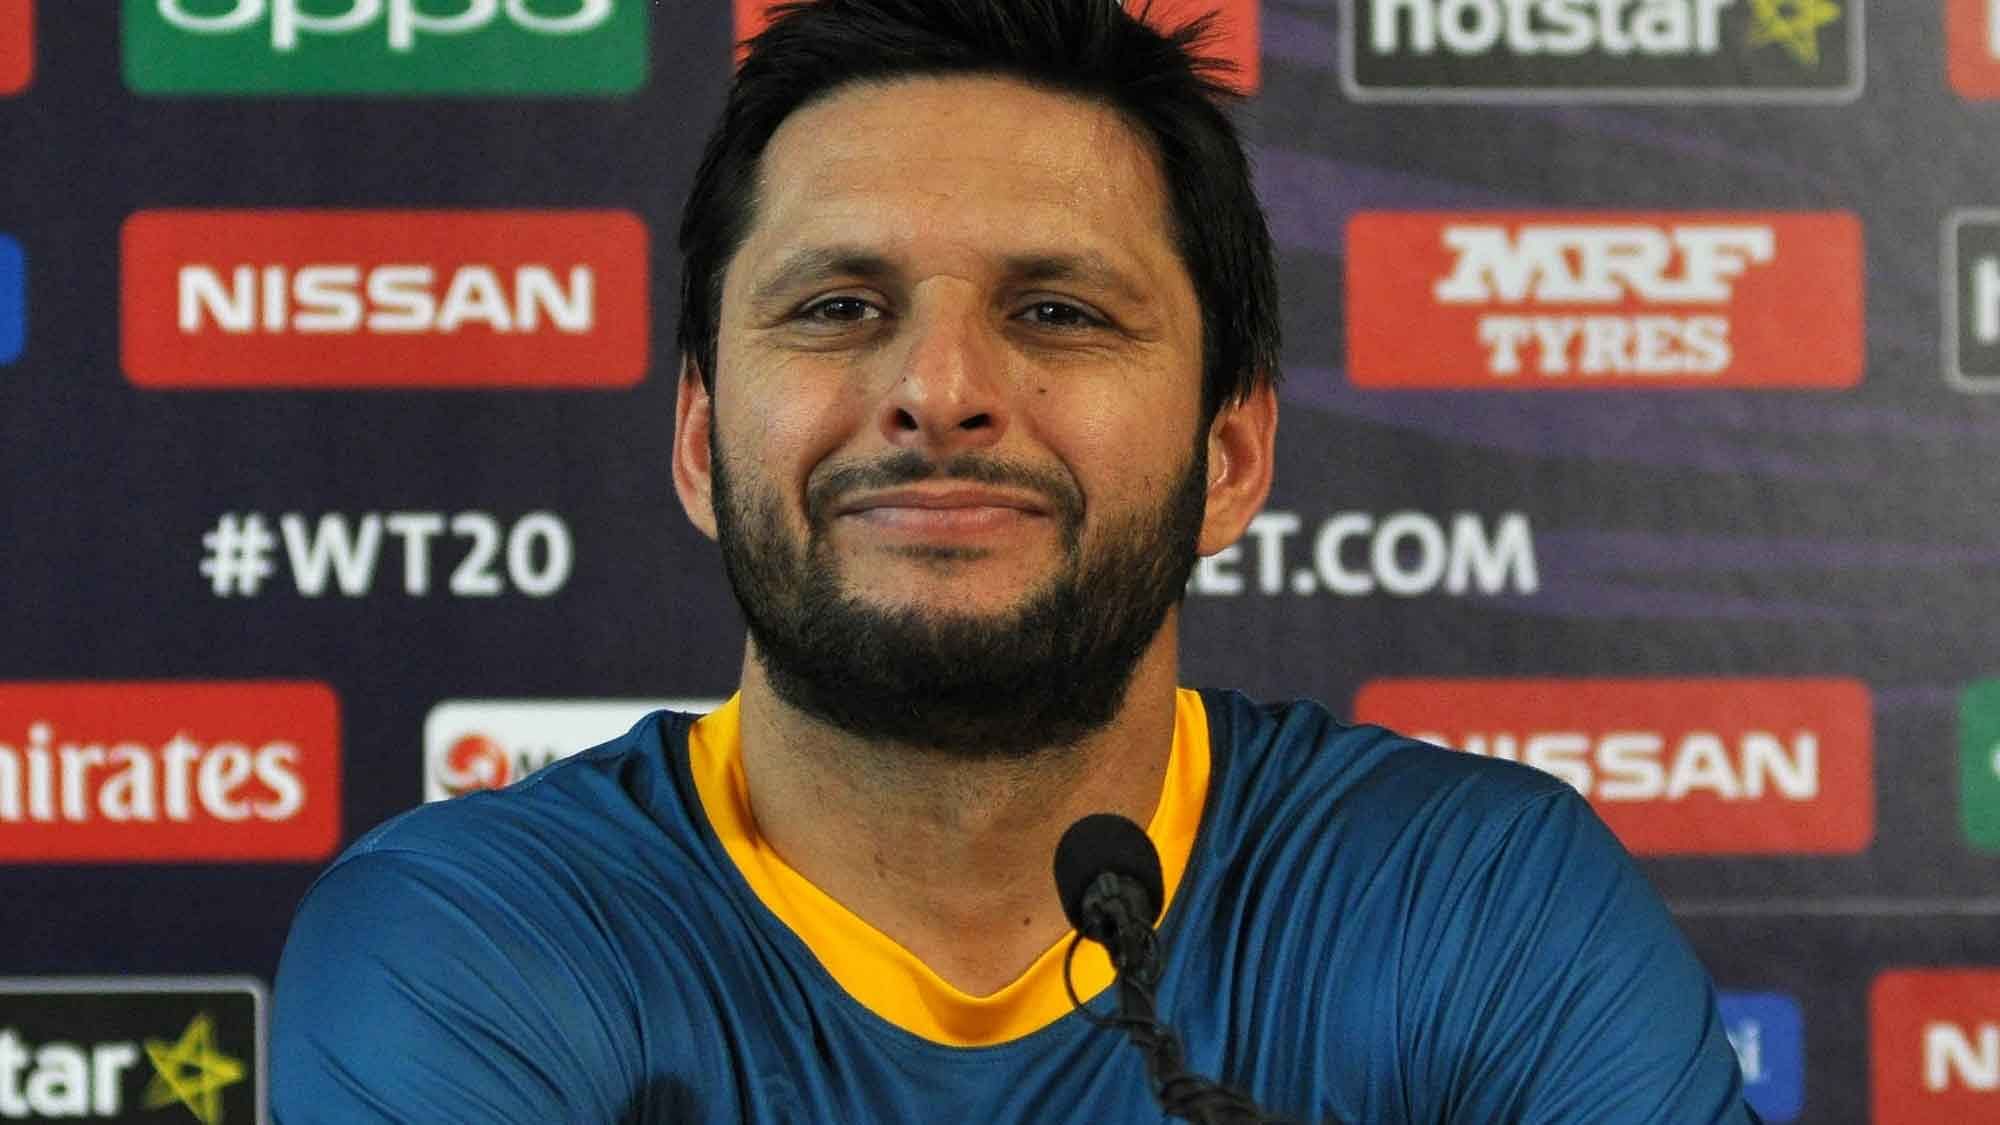 Former Pakistan cricketer Shahid Afridi said that the standard of cricket being played by the ‘Men in Blue’ has been “exceptionally high”.